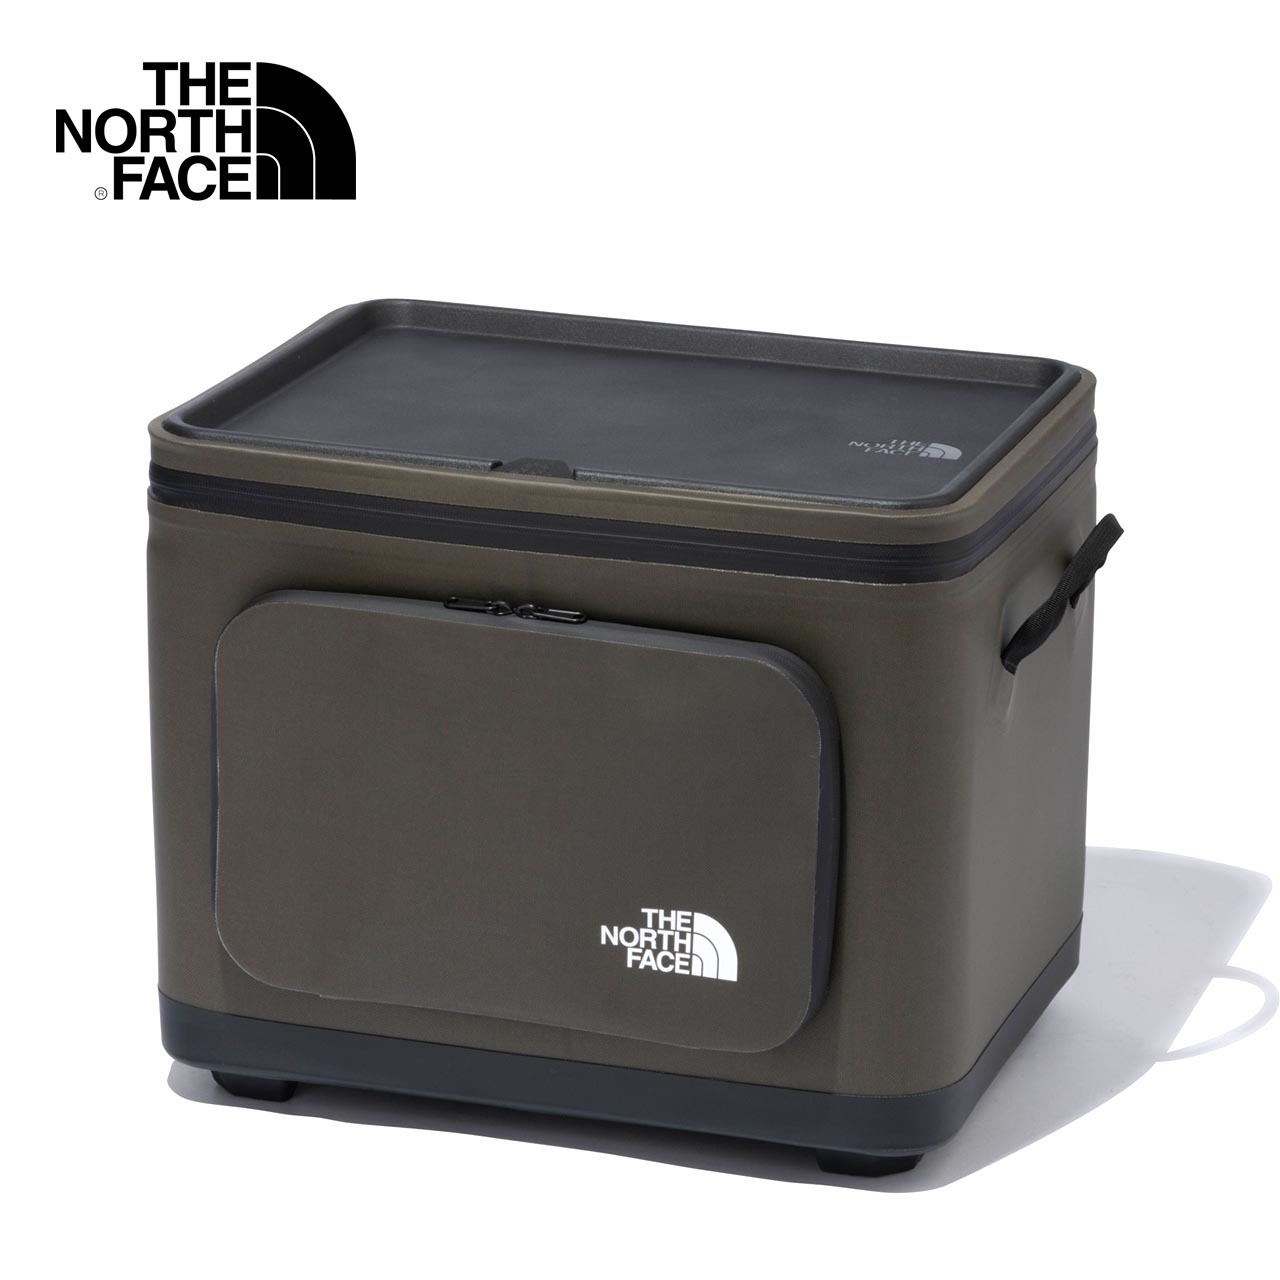 THE NORTH FACE [ザ・ノース・フェイス] Fieludens Gear Container [NM82235]_f0051306_06005848.jpg